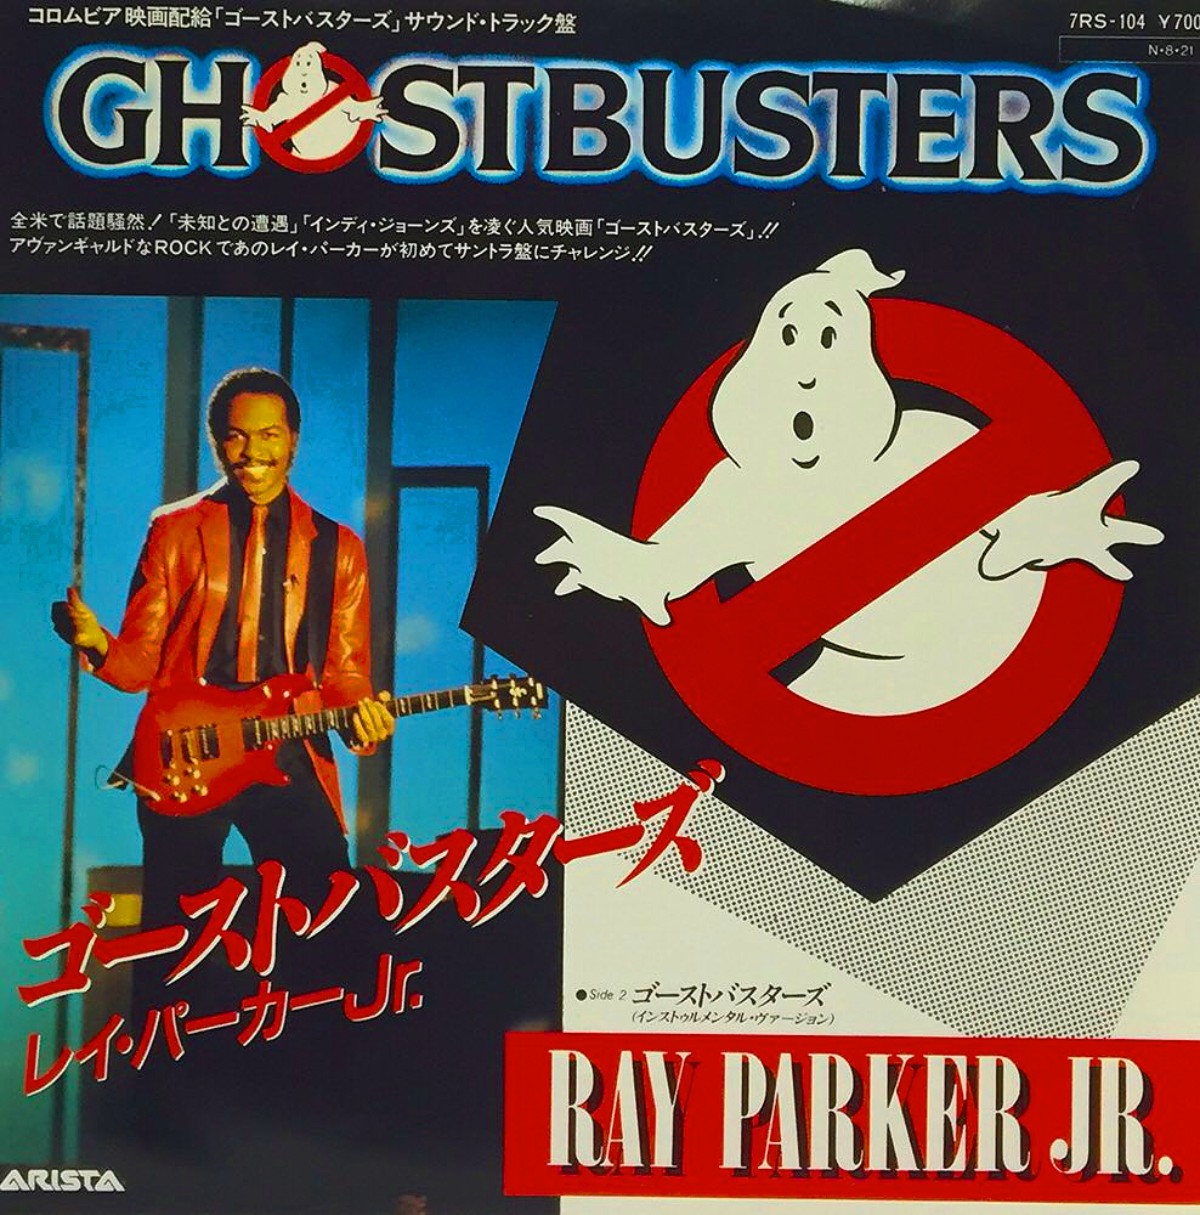 Ghostbusters (1984) - Ray Parker JR (Ray Parker Jr.) - single cover